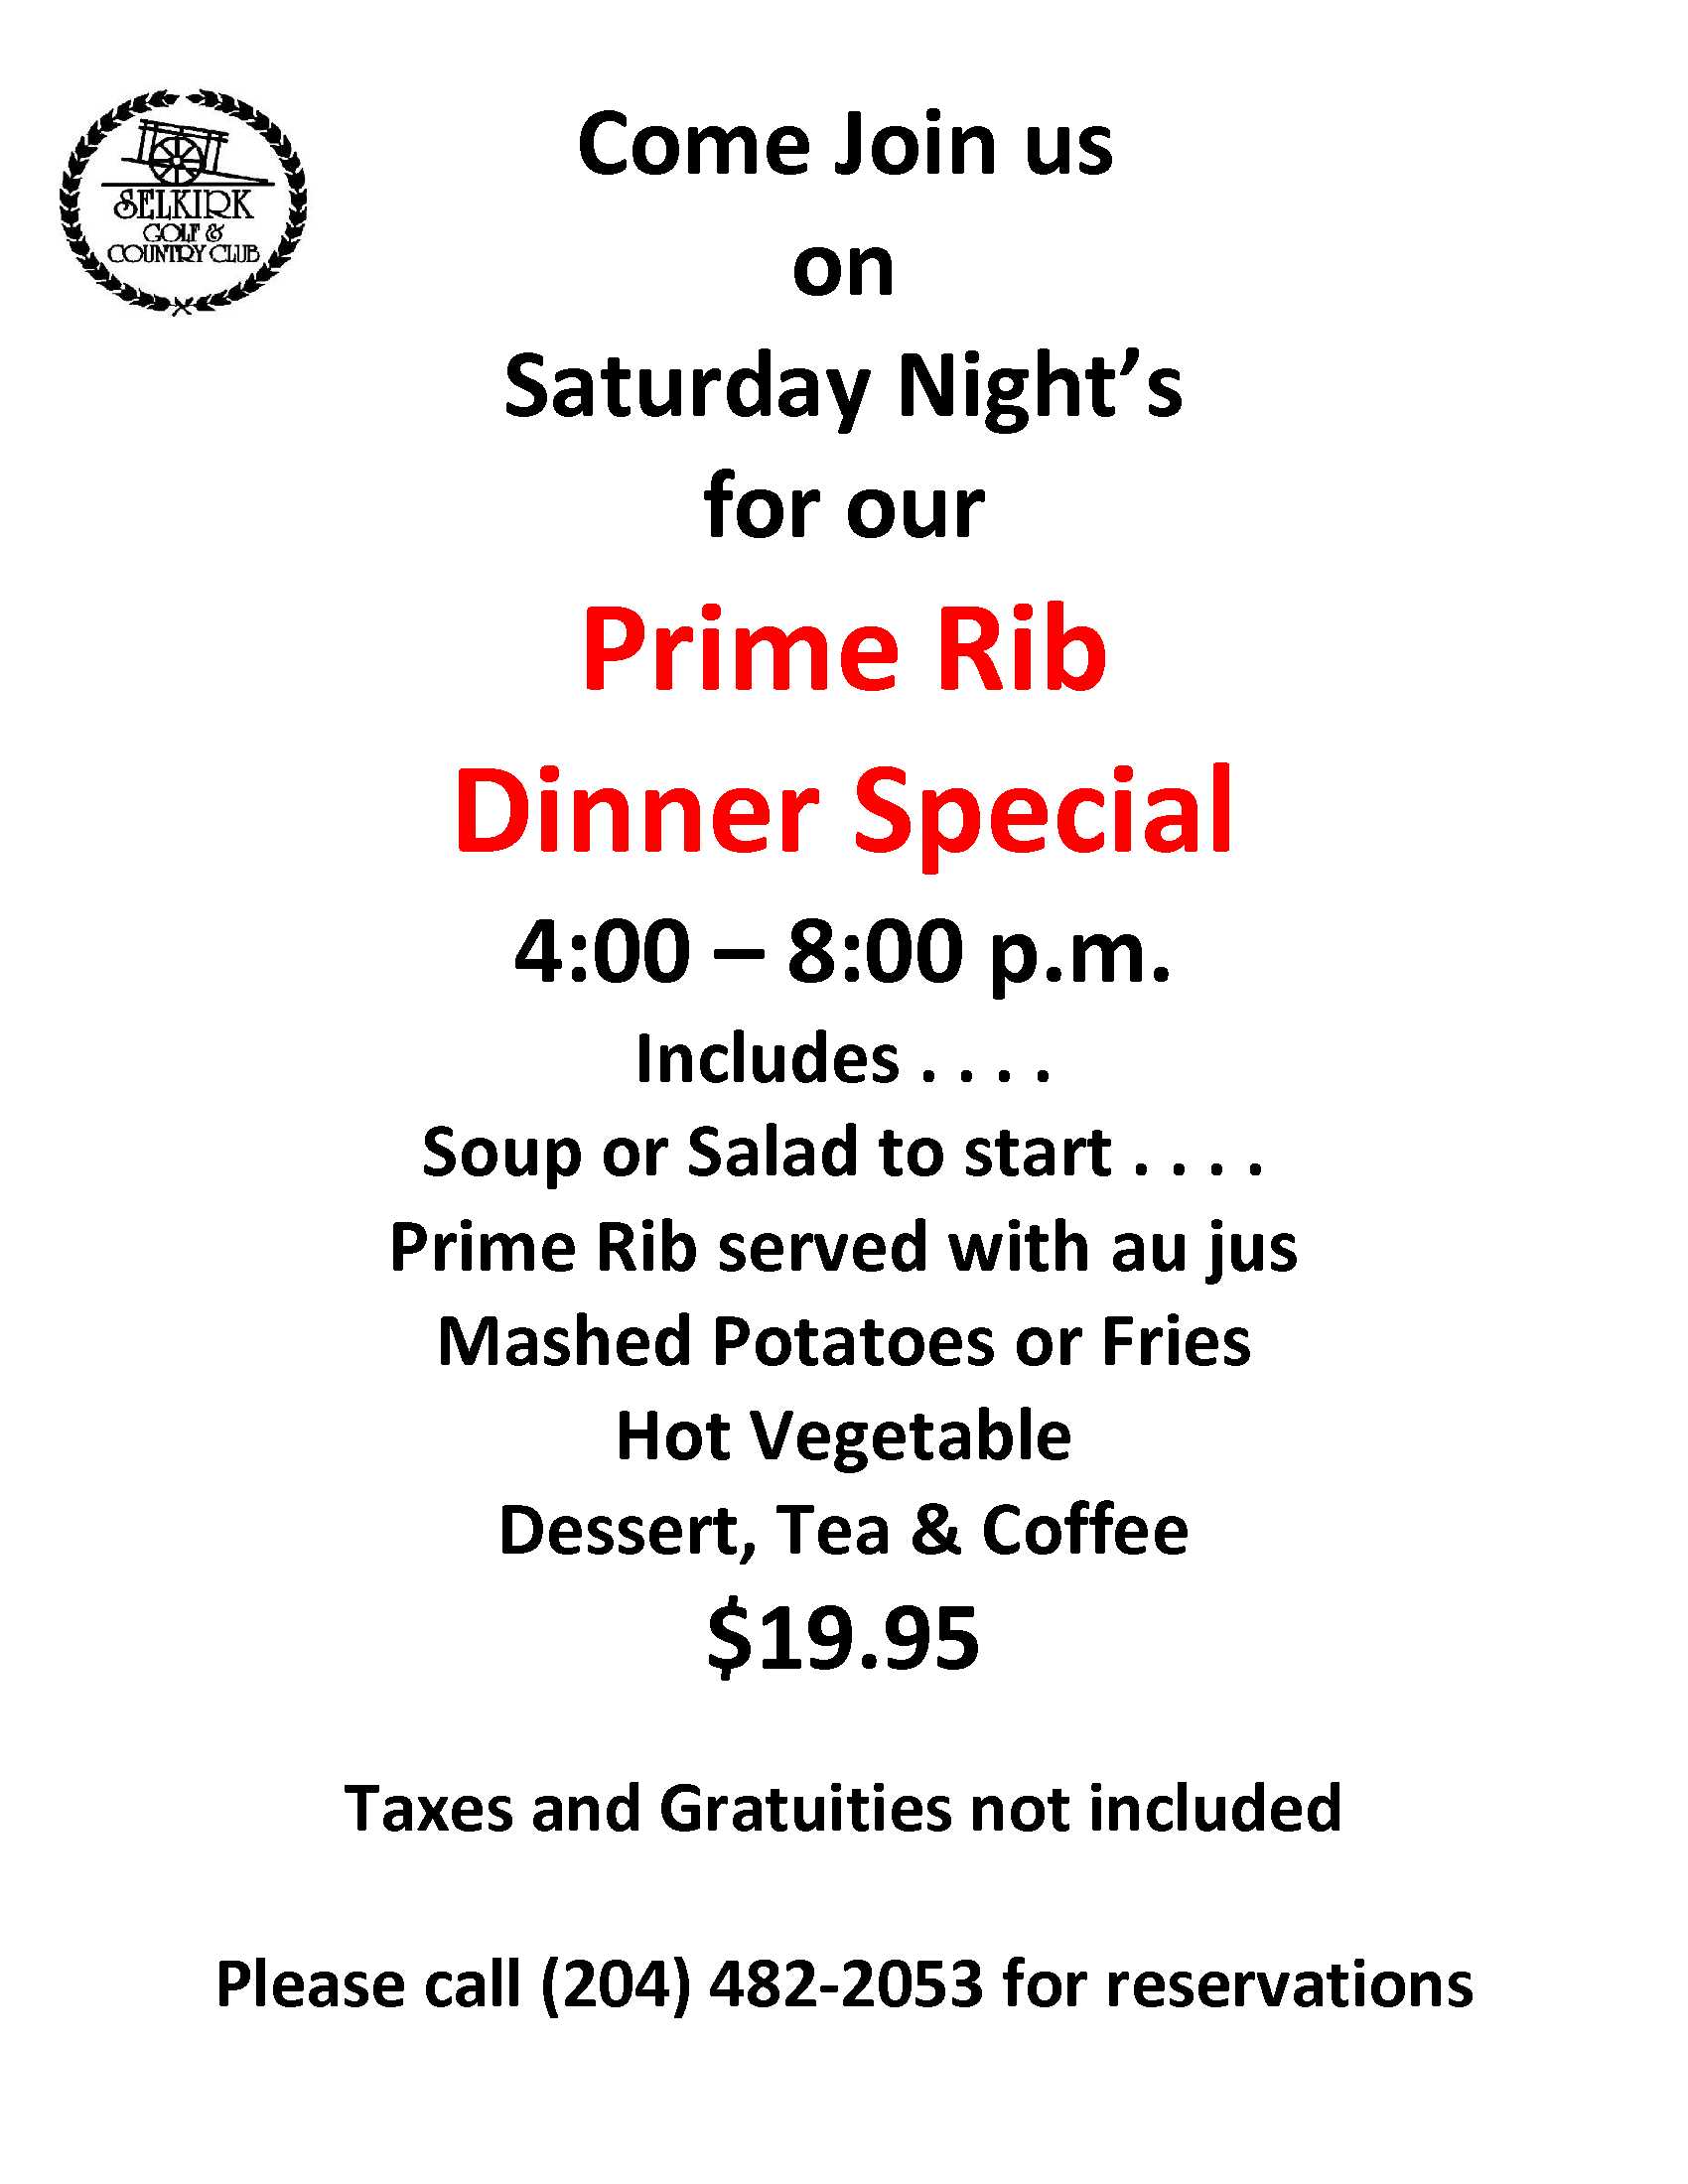 Saturday Prime Rib Dinner special - Selkirk Golf Course and Country Club